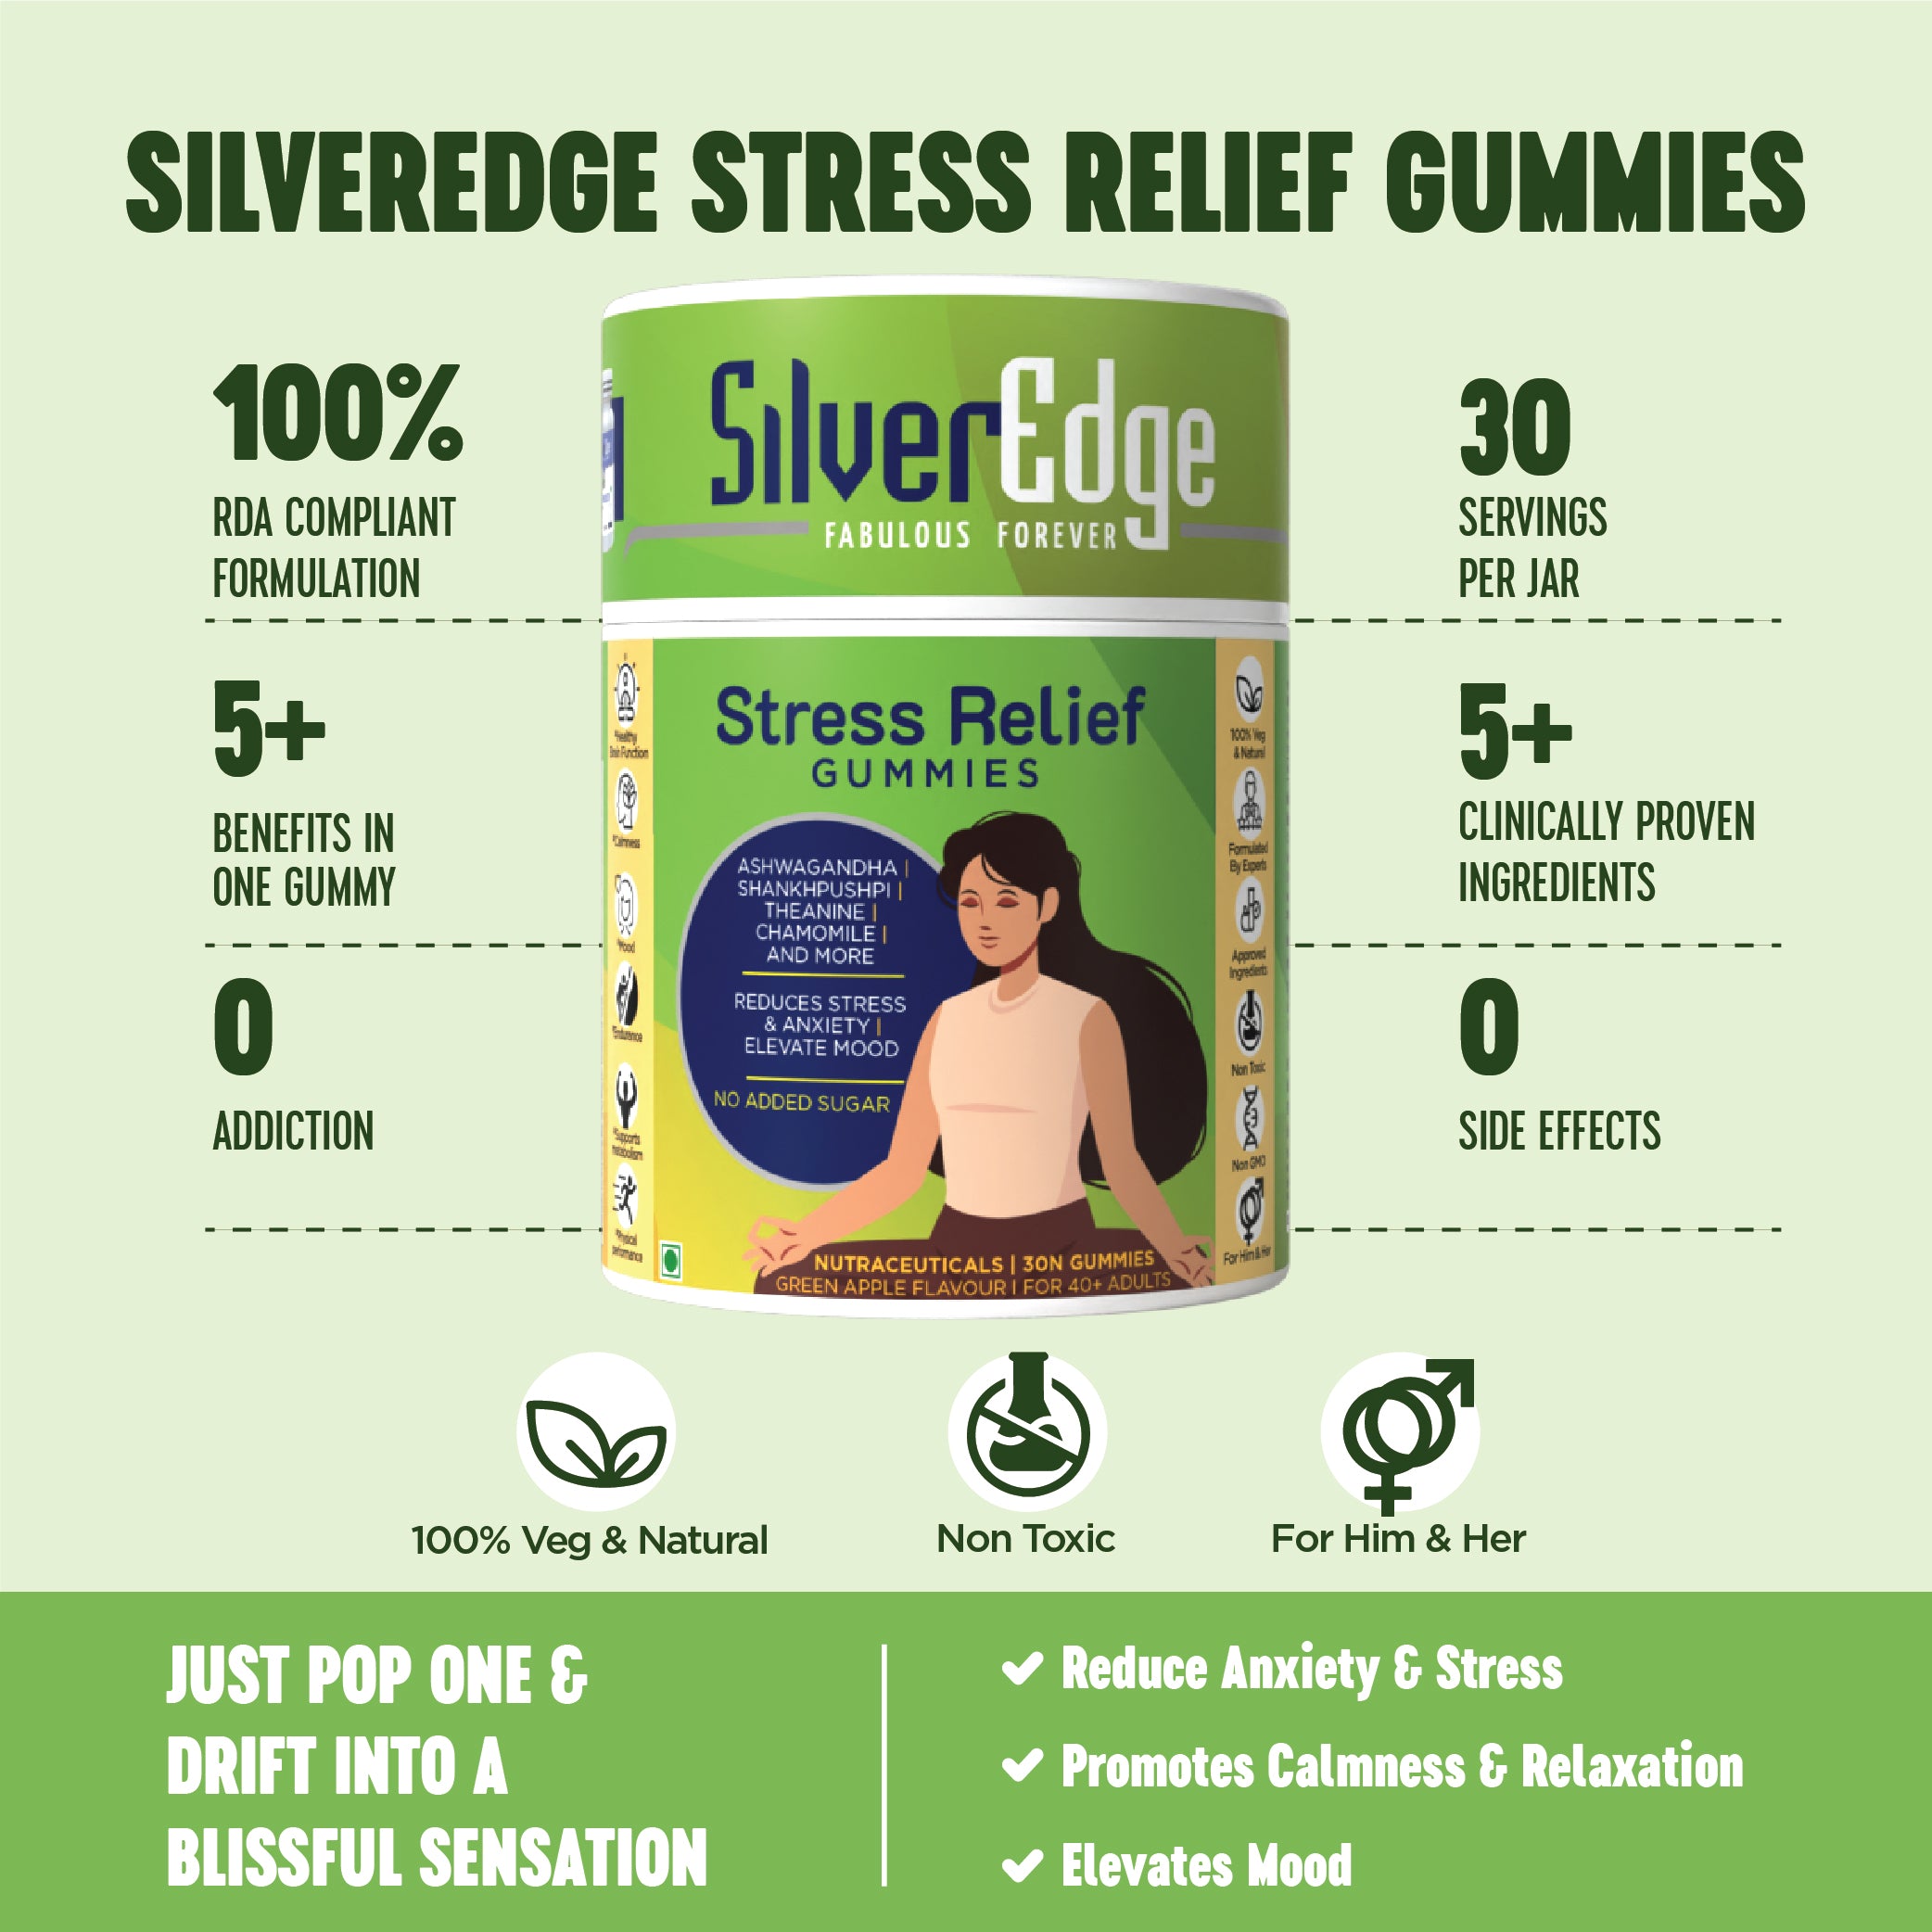 Buy Stress Relief Tablets in India, Buy Stress Relief Tablets, Stress Relief Tablets in India, Stress Relief Tablets, Anxiety Relief Tablets, SilverEdge